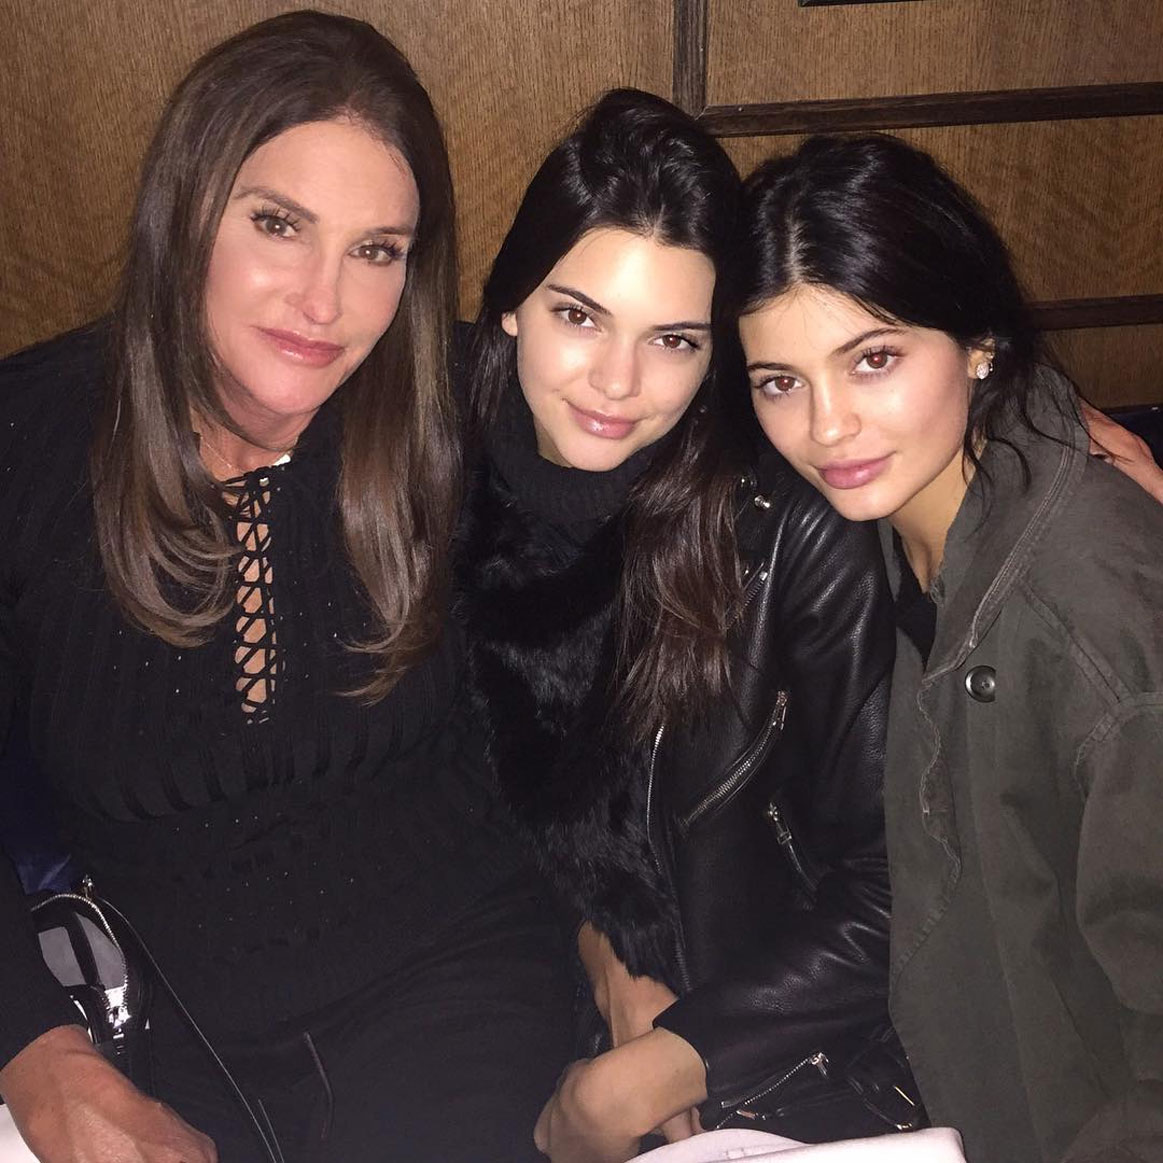 Kylie Jenner stunned by Caitlyn’s “inappropriate” gift